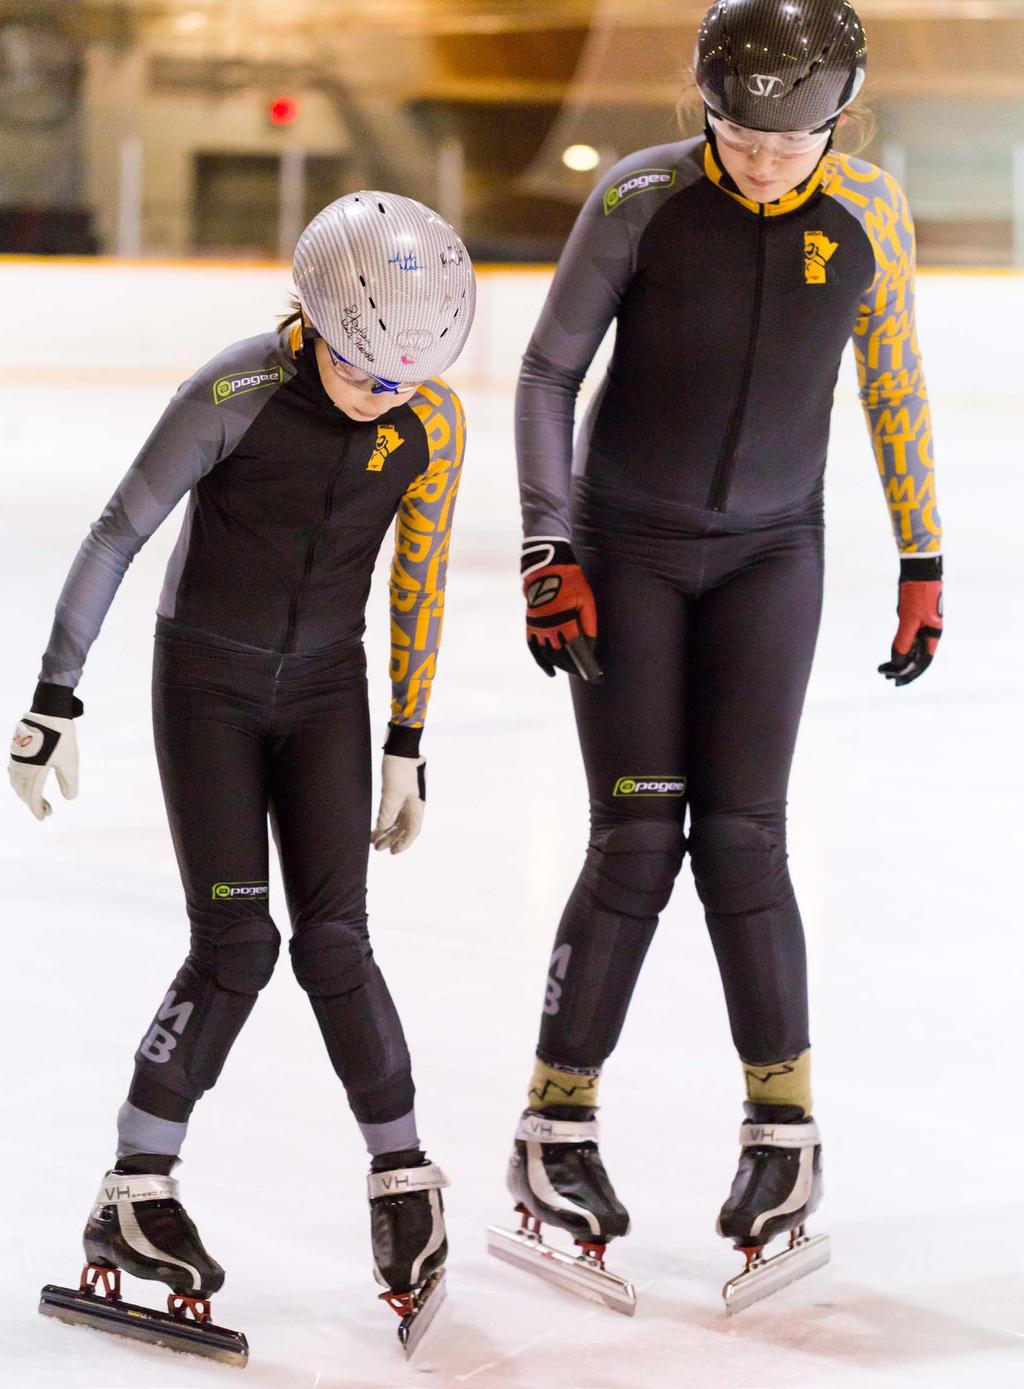 International Skating Union: The international federation that governs the sports of short track and long track speed skating, as well as figure skating, and of which Speed Skating Canada is a voting